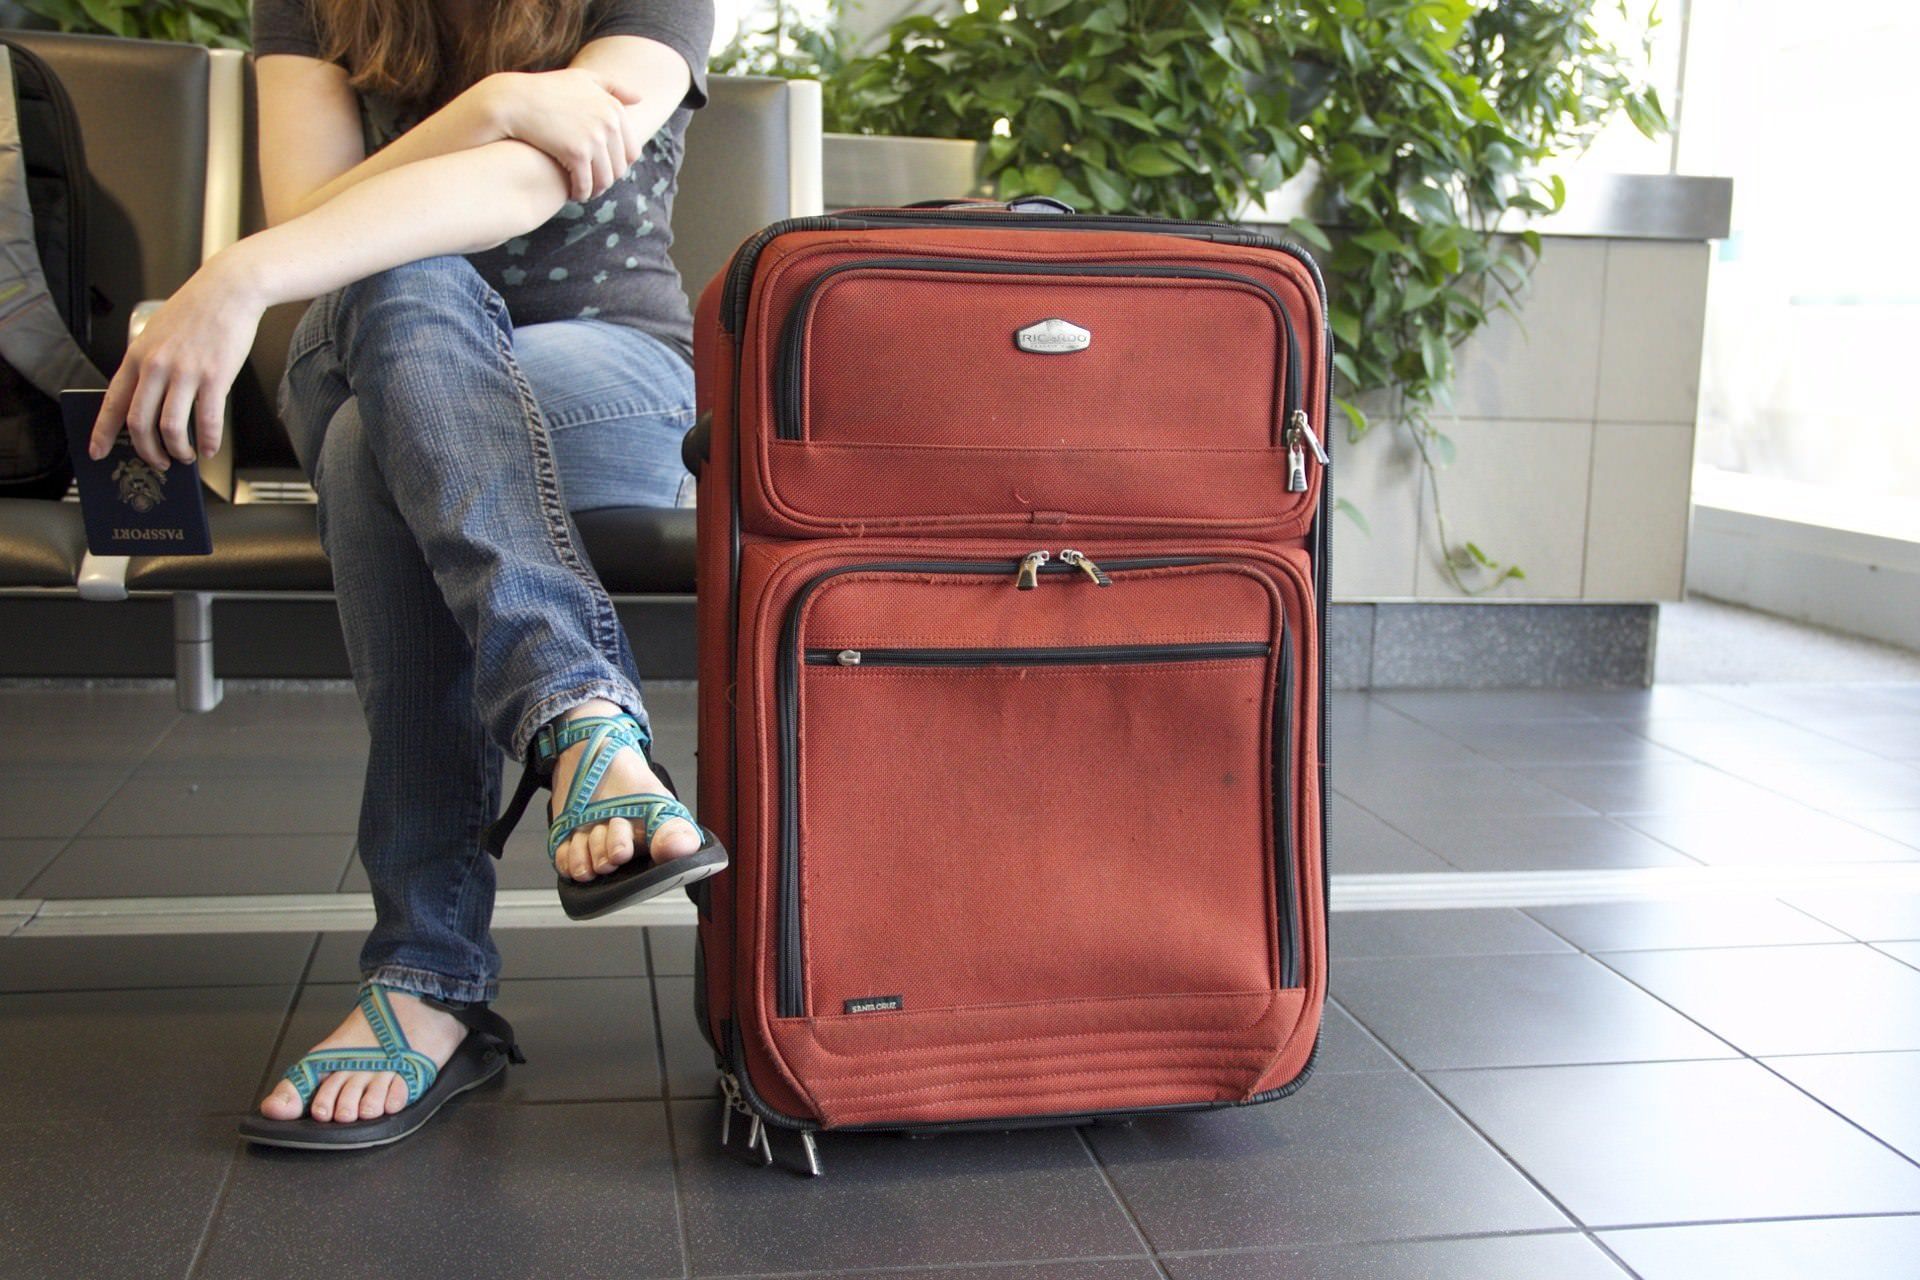 Girl and suitcase at airport